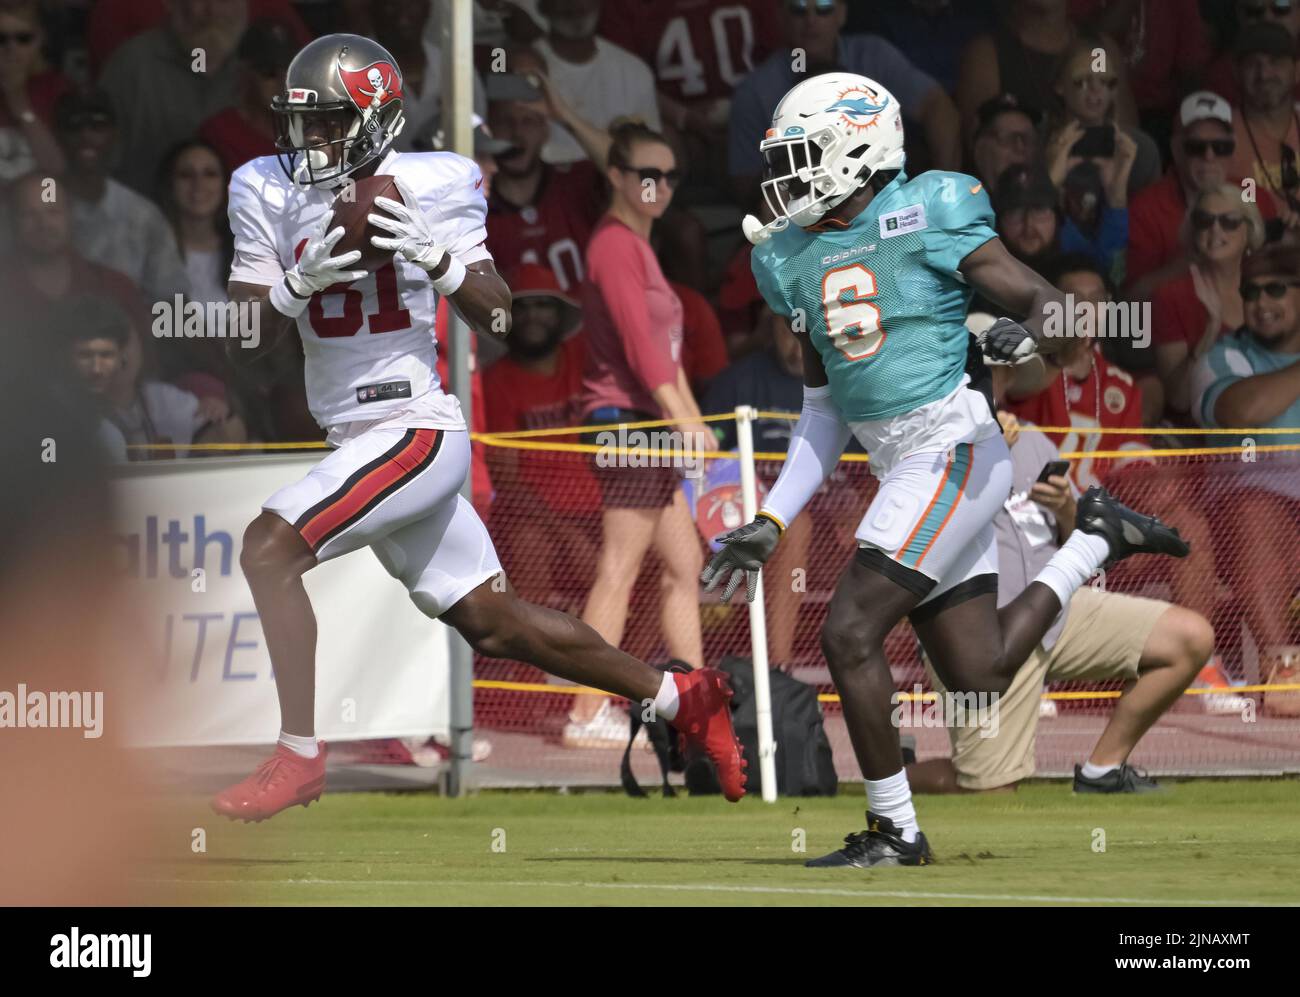 Tampa, United States. 10th Aug, 2022. Tampa Bay Buccaneers' Vyncint Smith (L) beats Miami Dolphins' Trill Williams (6) for a reception during a joint practice at the Buccaneer's training center in Tampa, Florida on Wednesday, August 10, 2022. Photo by Steve Nesius/UPI Credit: UPI/Alamy Live News Stock Photo